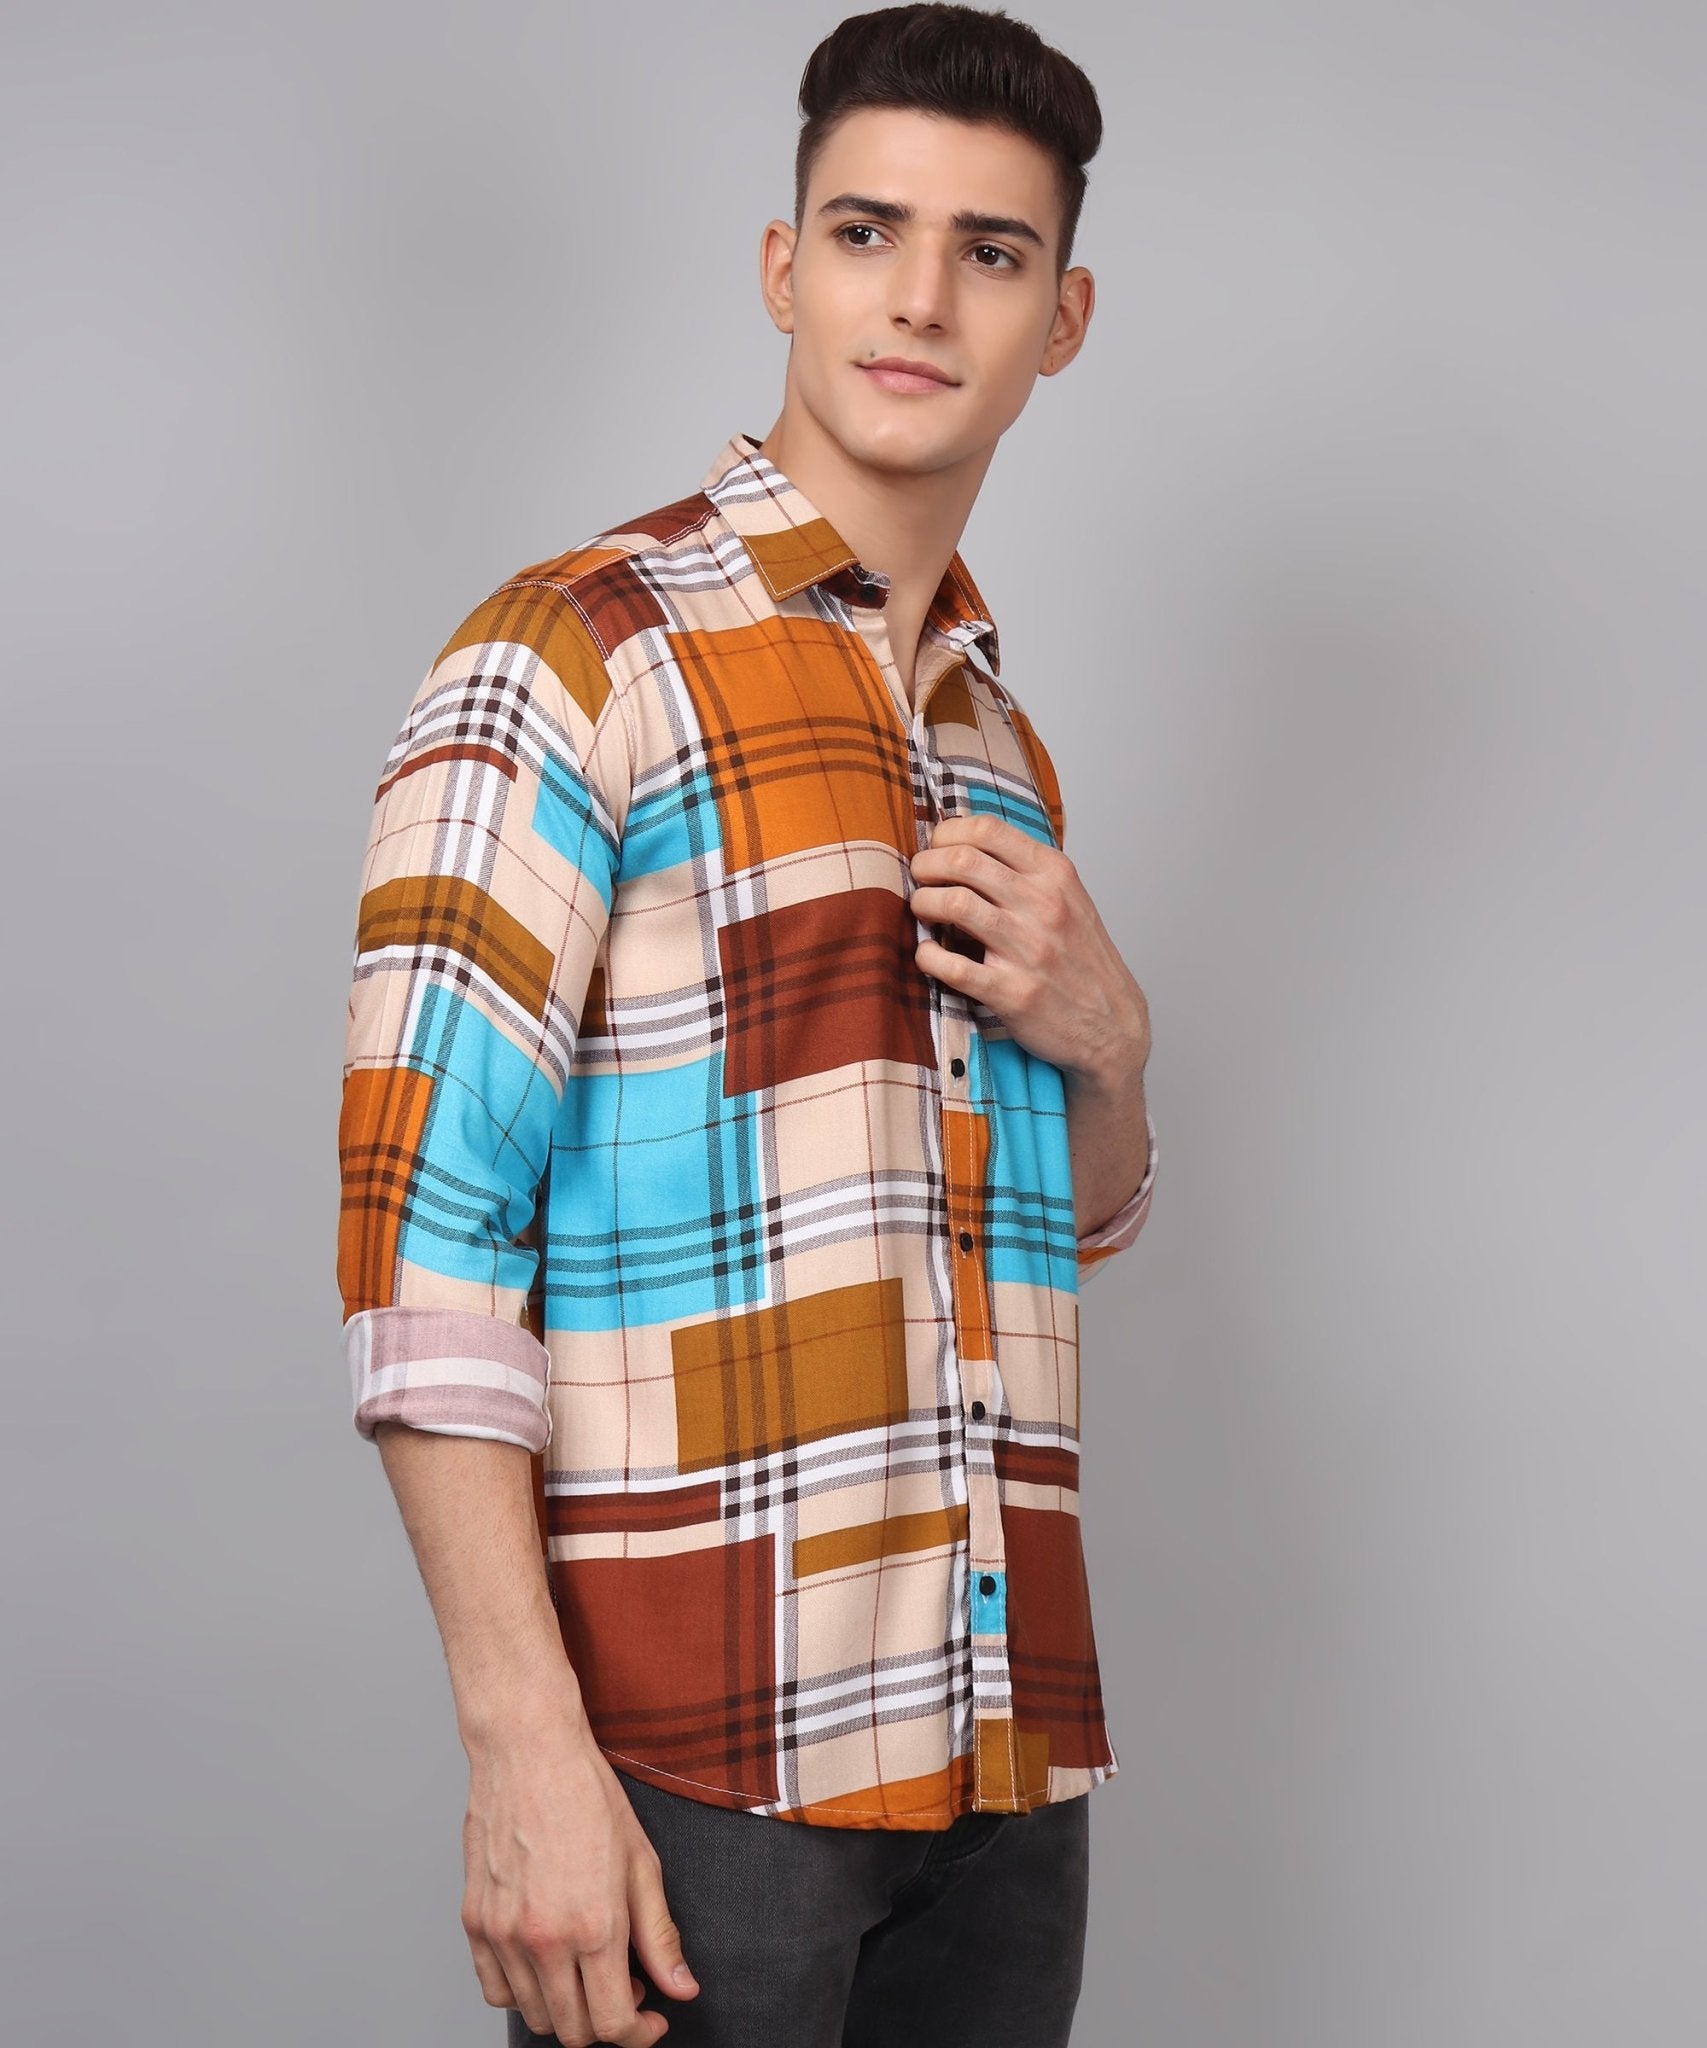 Trybuy Premium Printed Multi Colored Cotton Casual Shirt for Men - TryBuy® USA🇺🇸